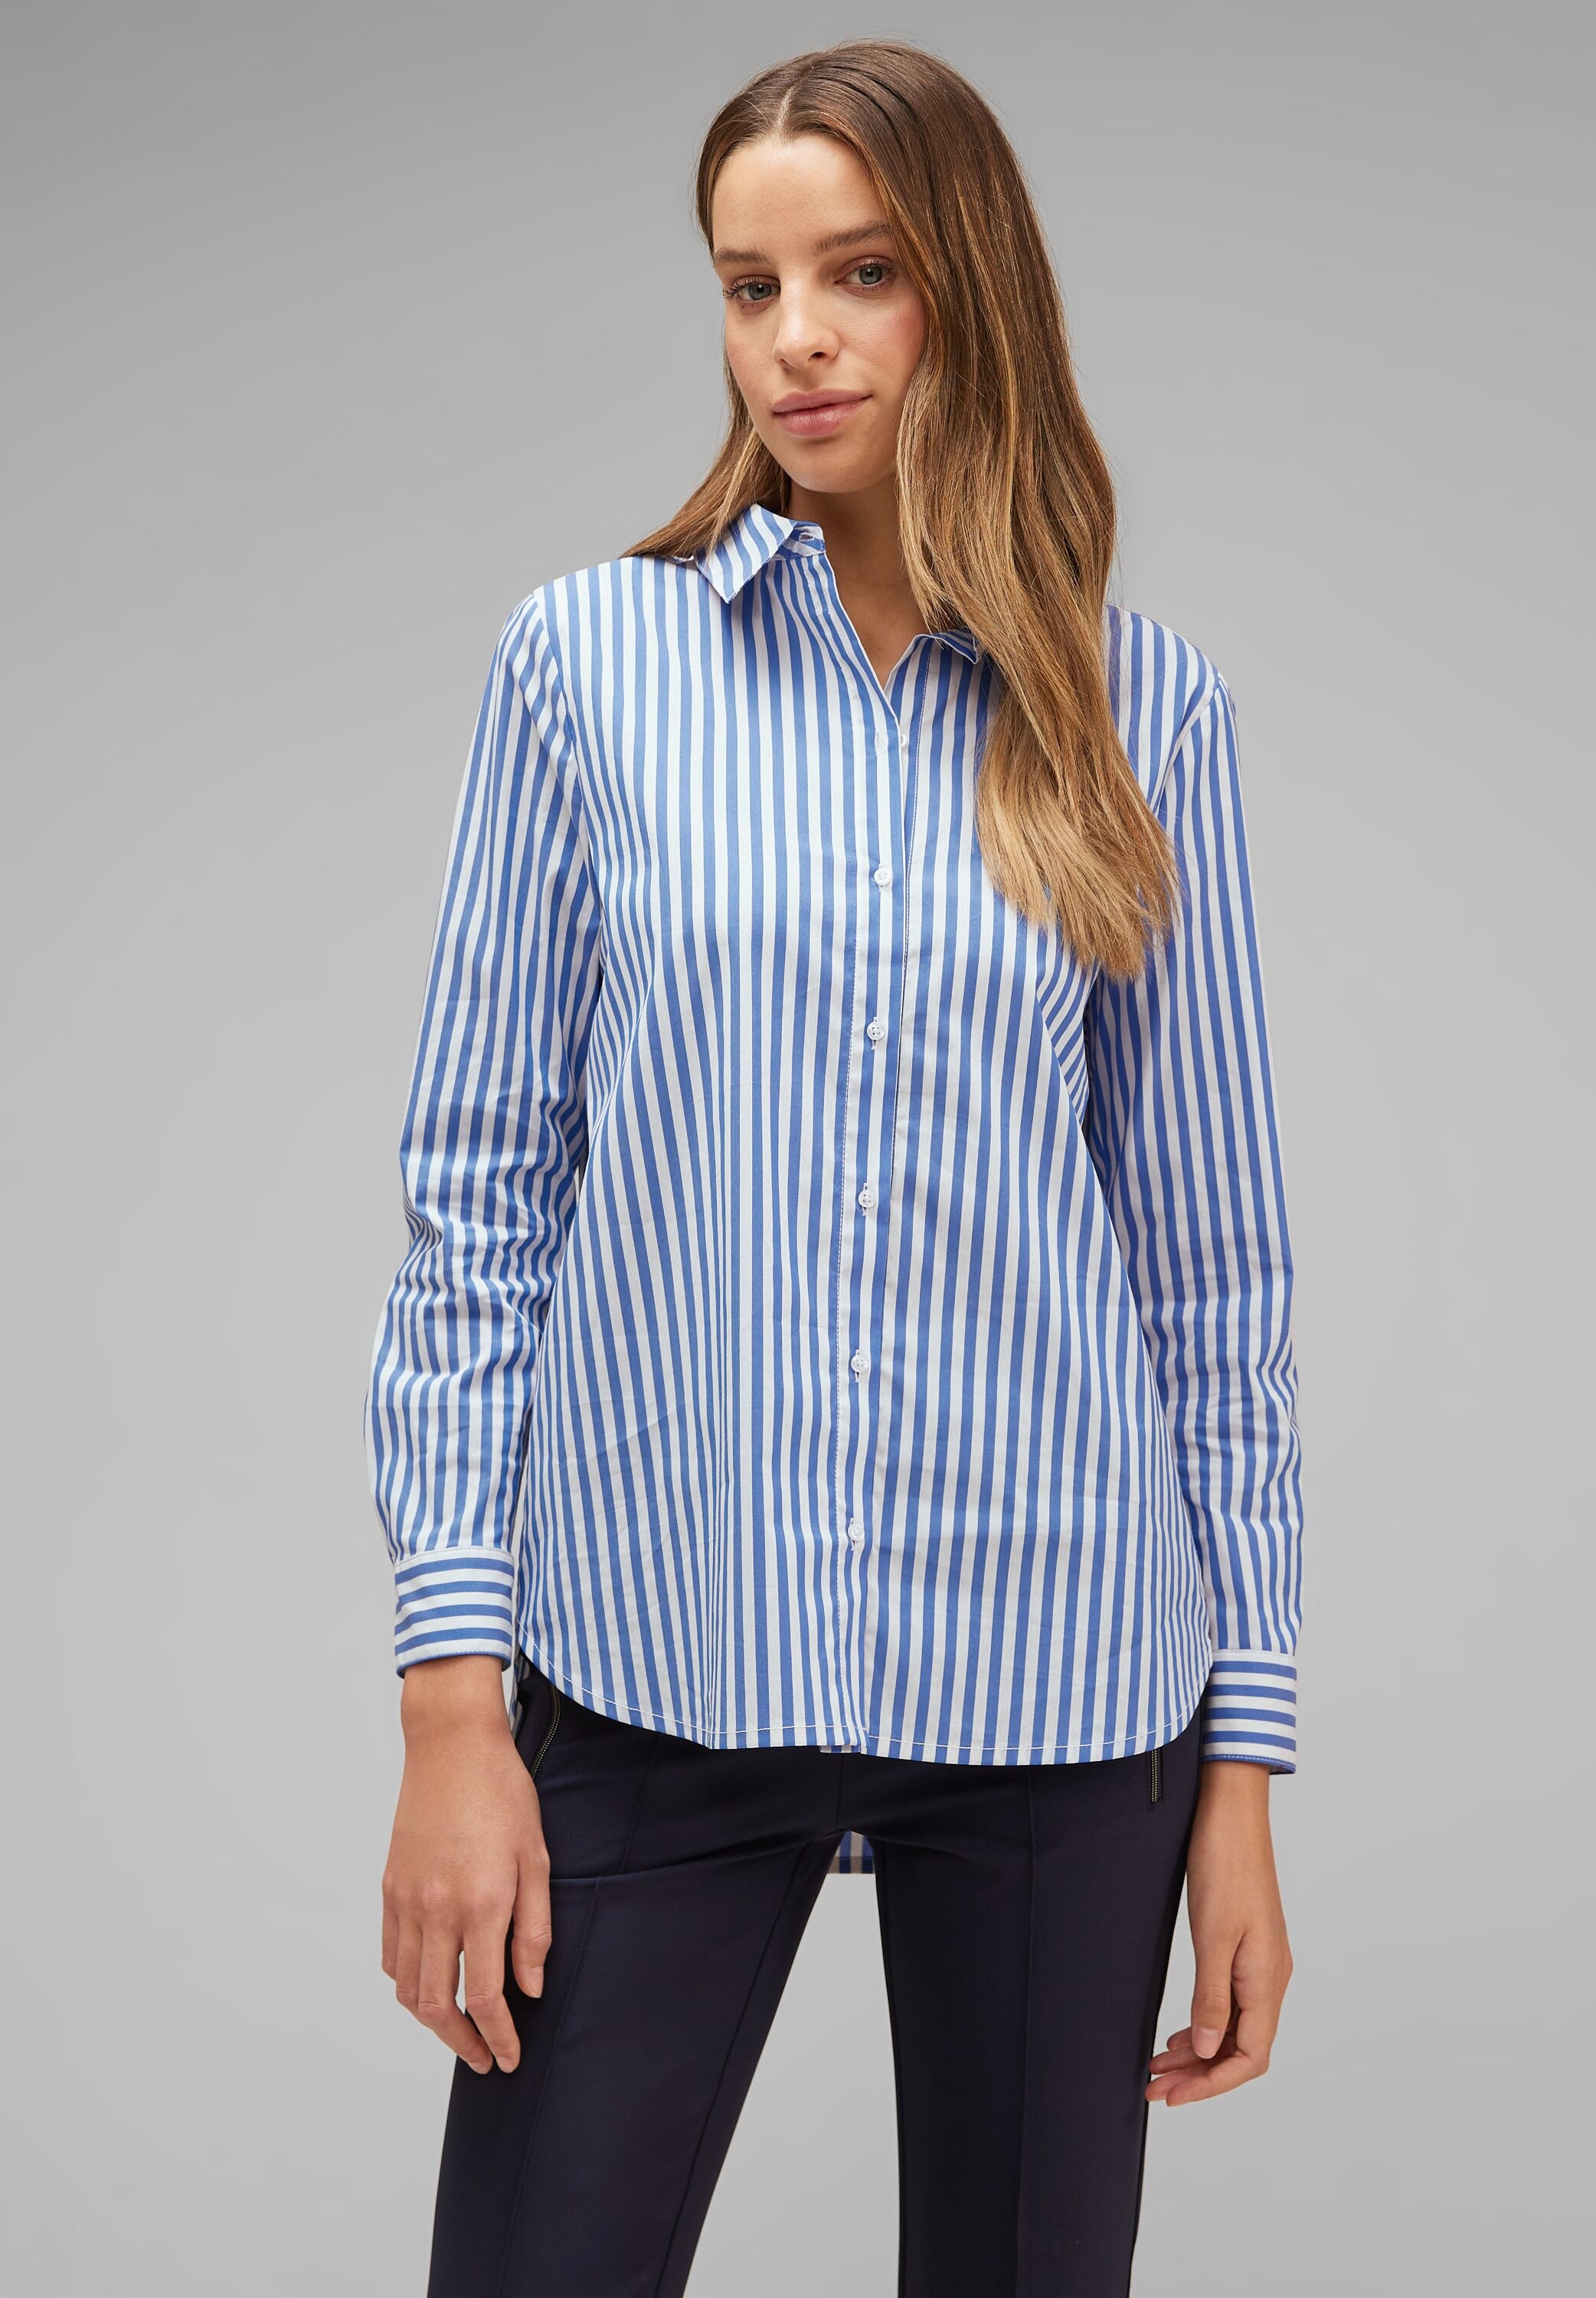 Office mit ONE »Striped ♕ bei Longbluse Blouse«, STREET Streifenmuster